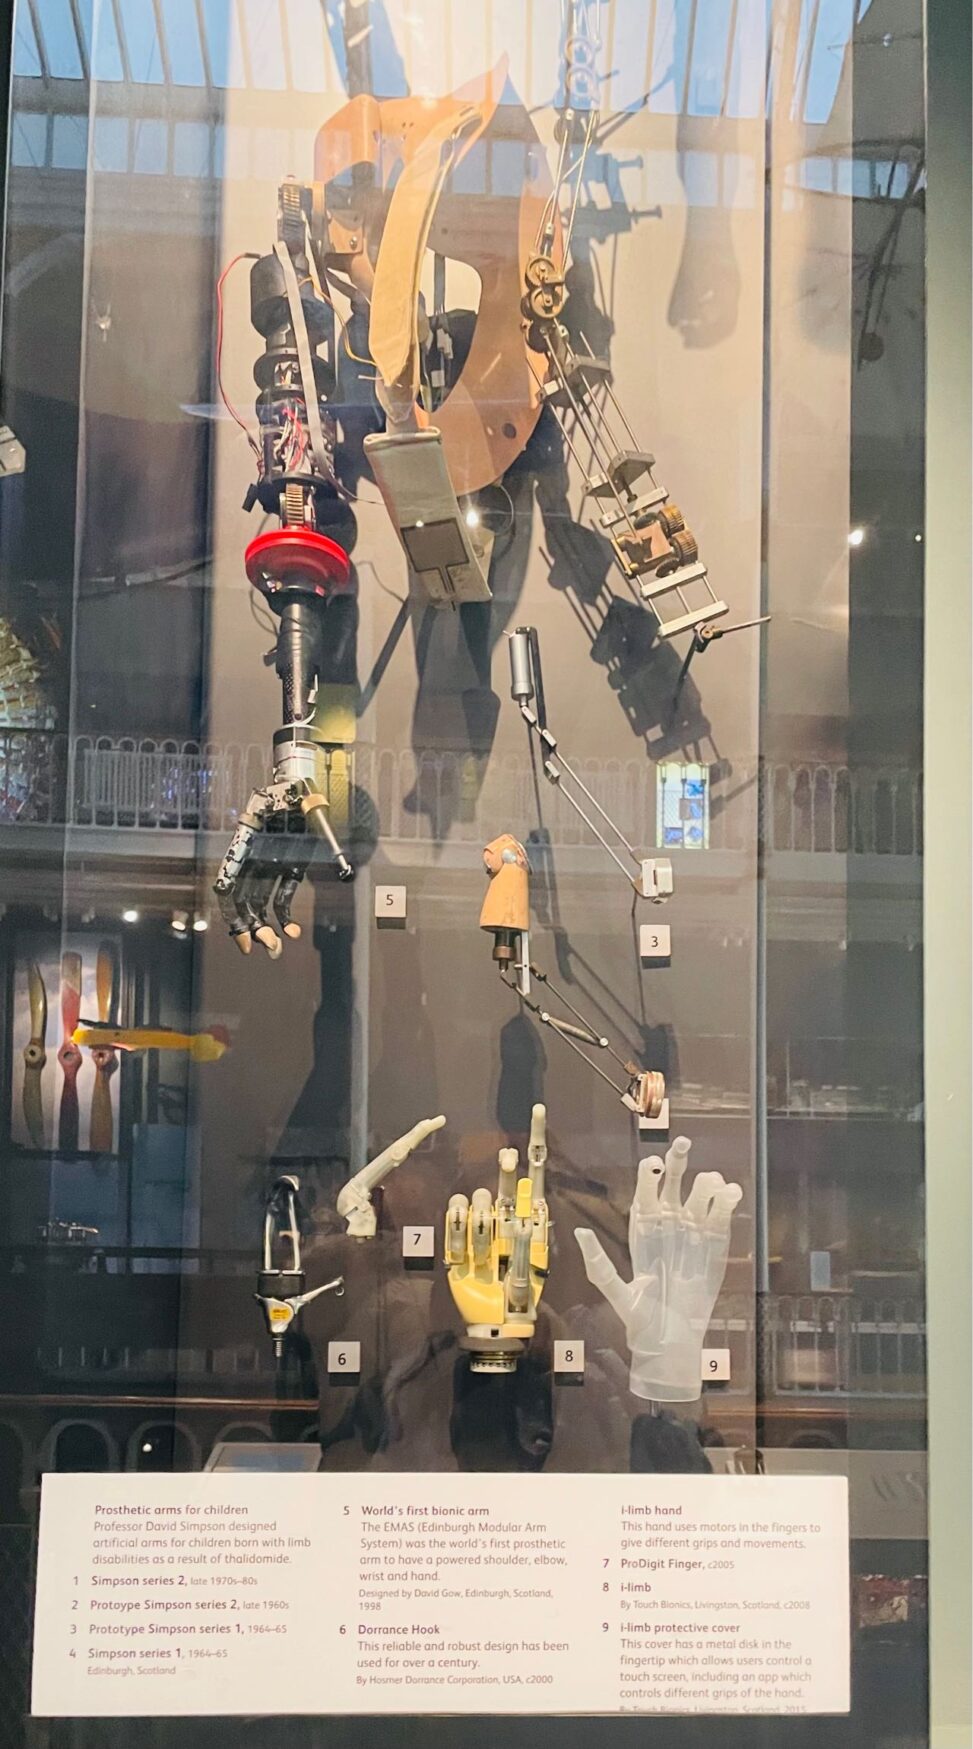 bionic hand, National Museums of Scotland